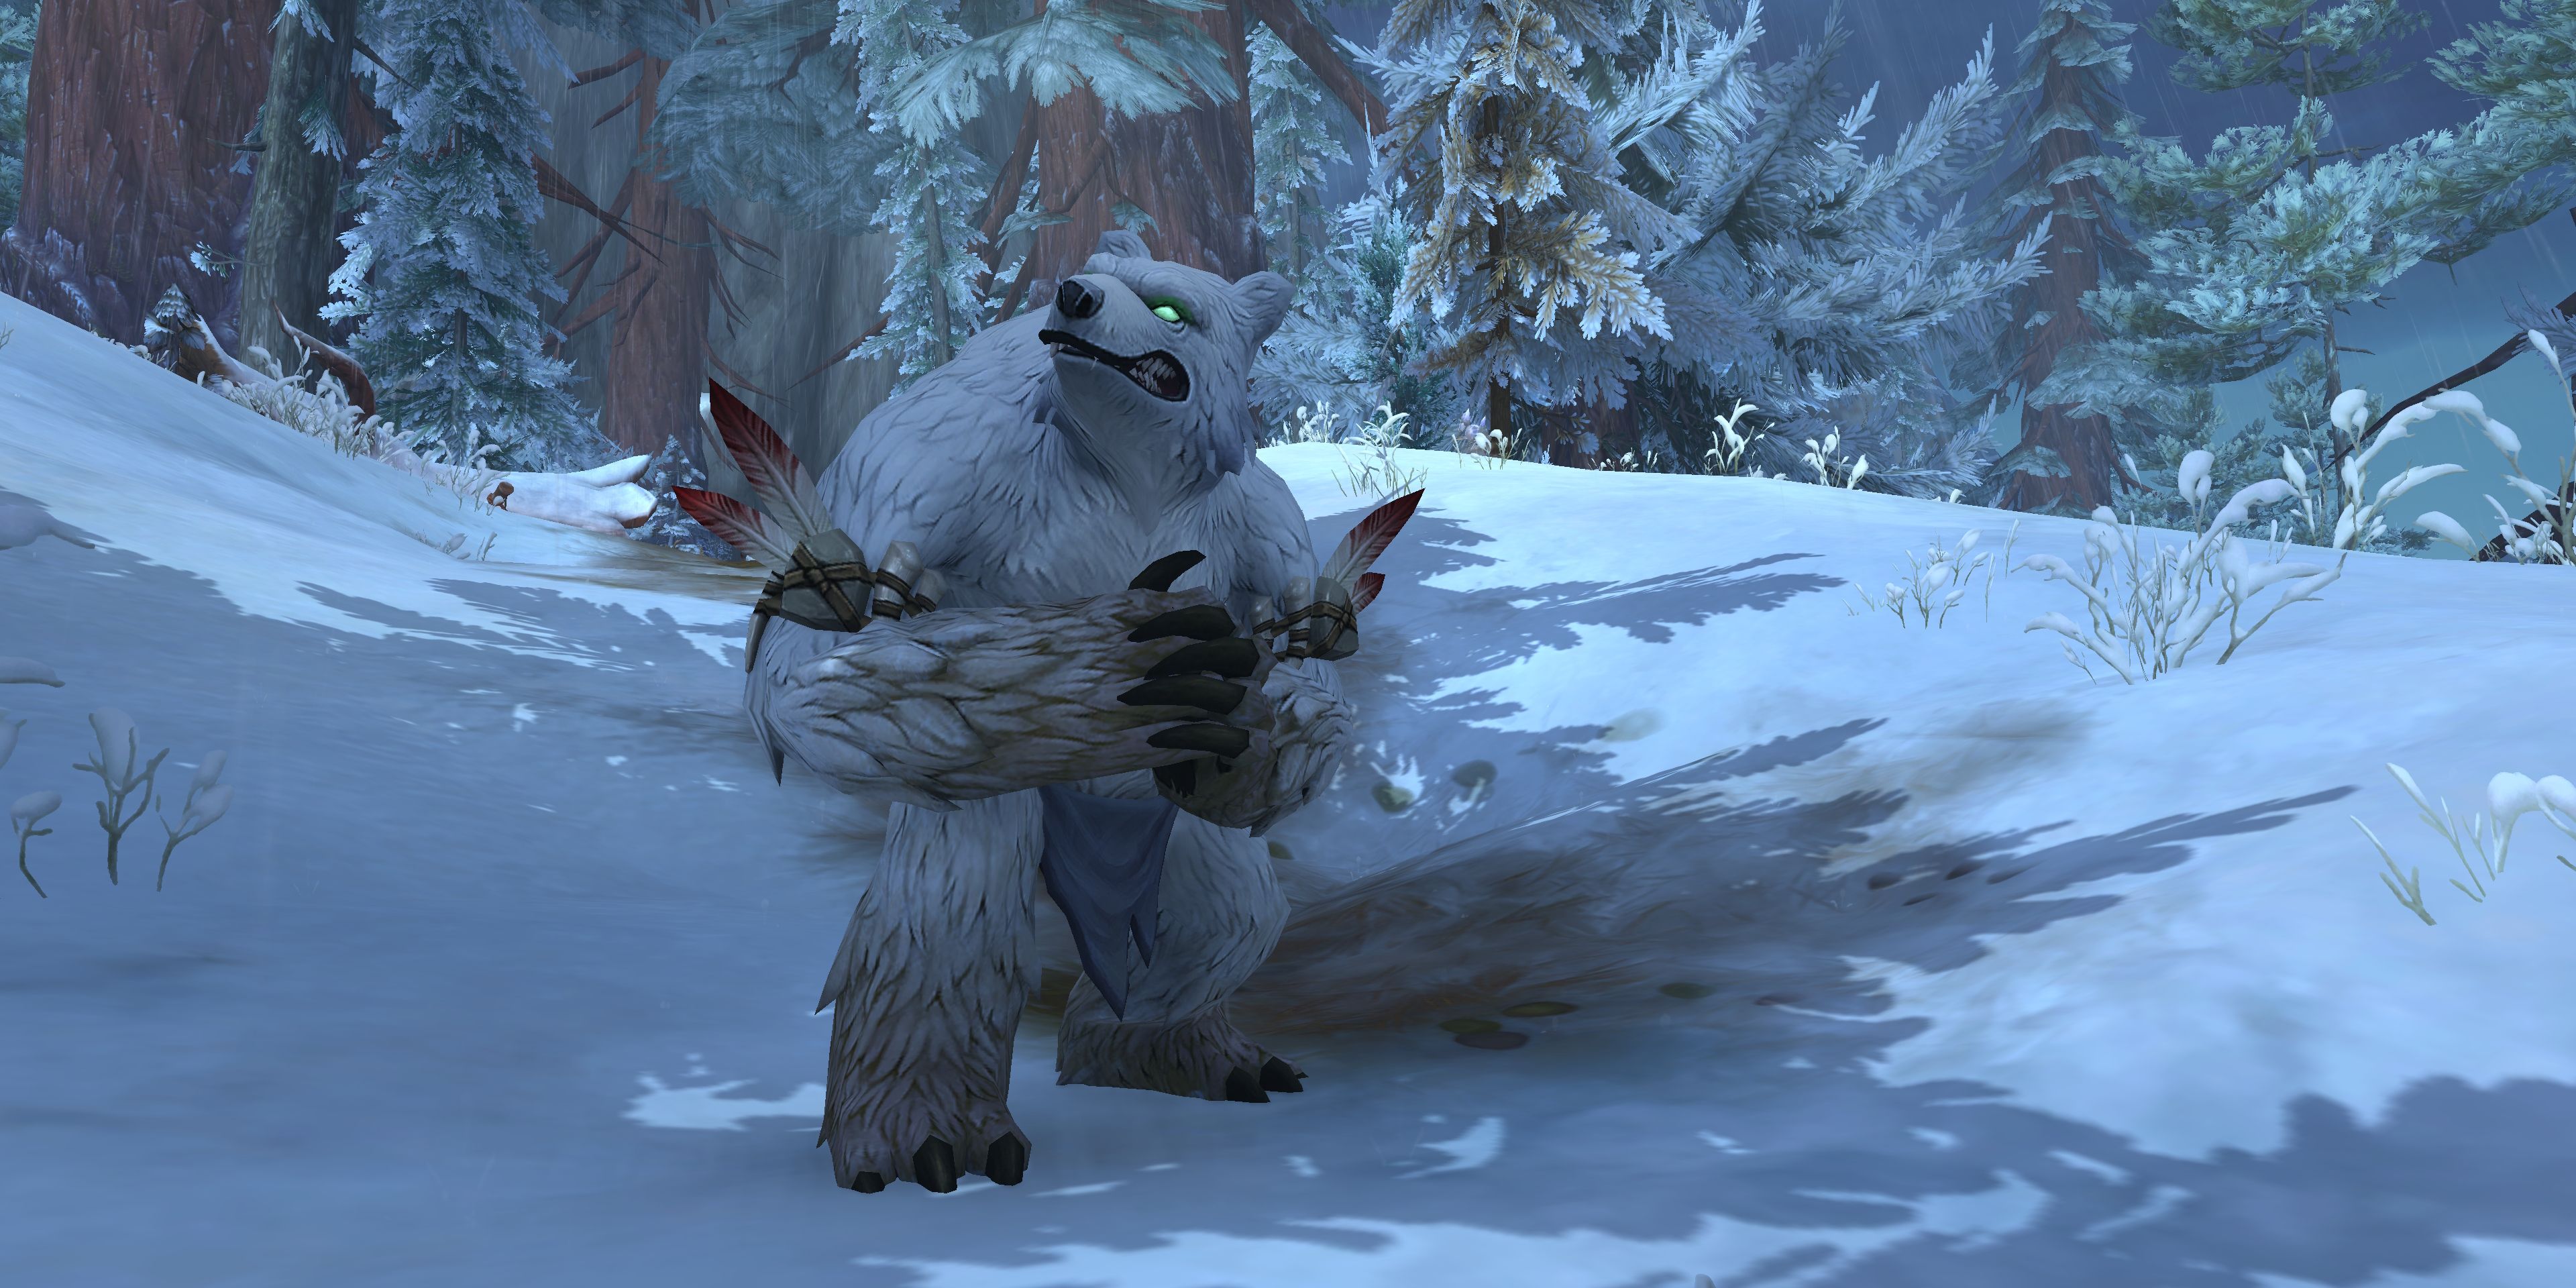 A Winterpelt Furbolg stands in a snowy wooded area looking up with a grimace at something in the sky